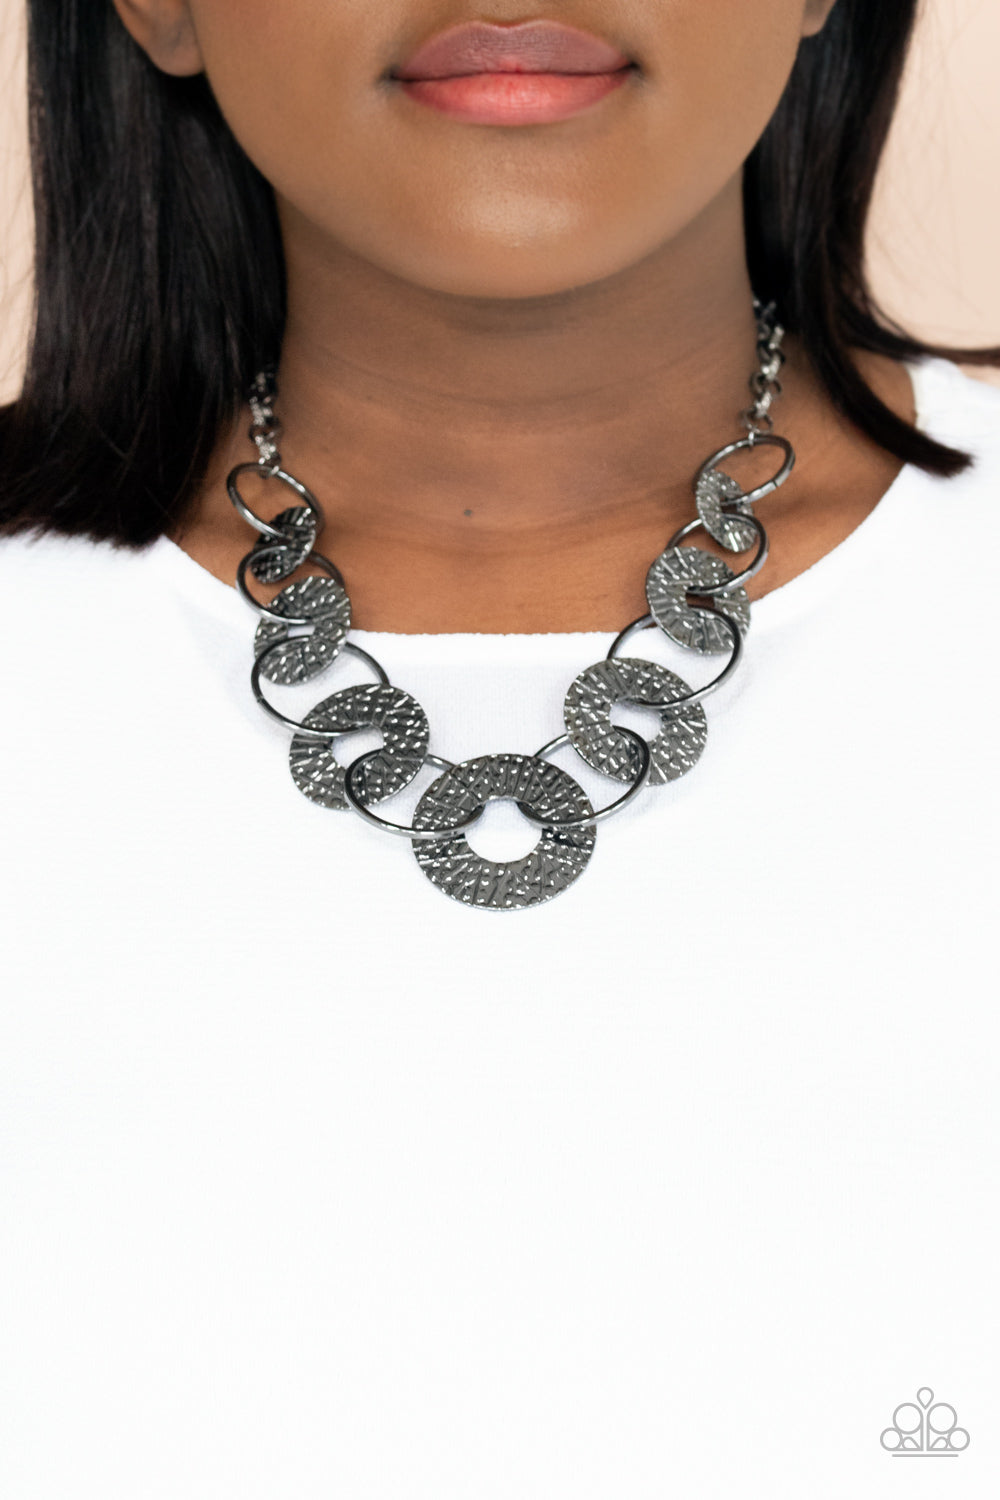 Paparazzi Industrial Envy - Black Necklace - A Finishing Touch Jewelry